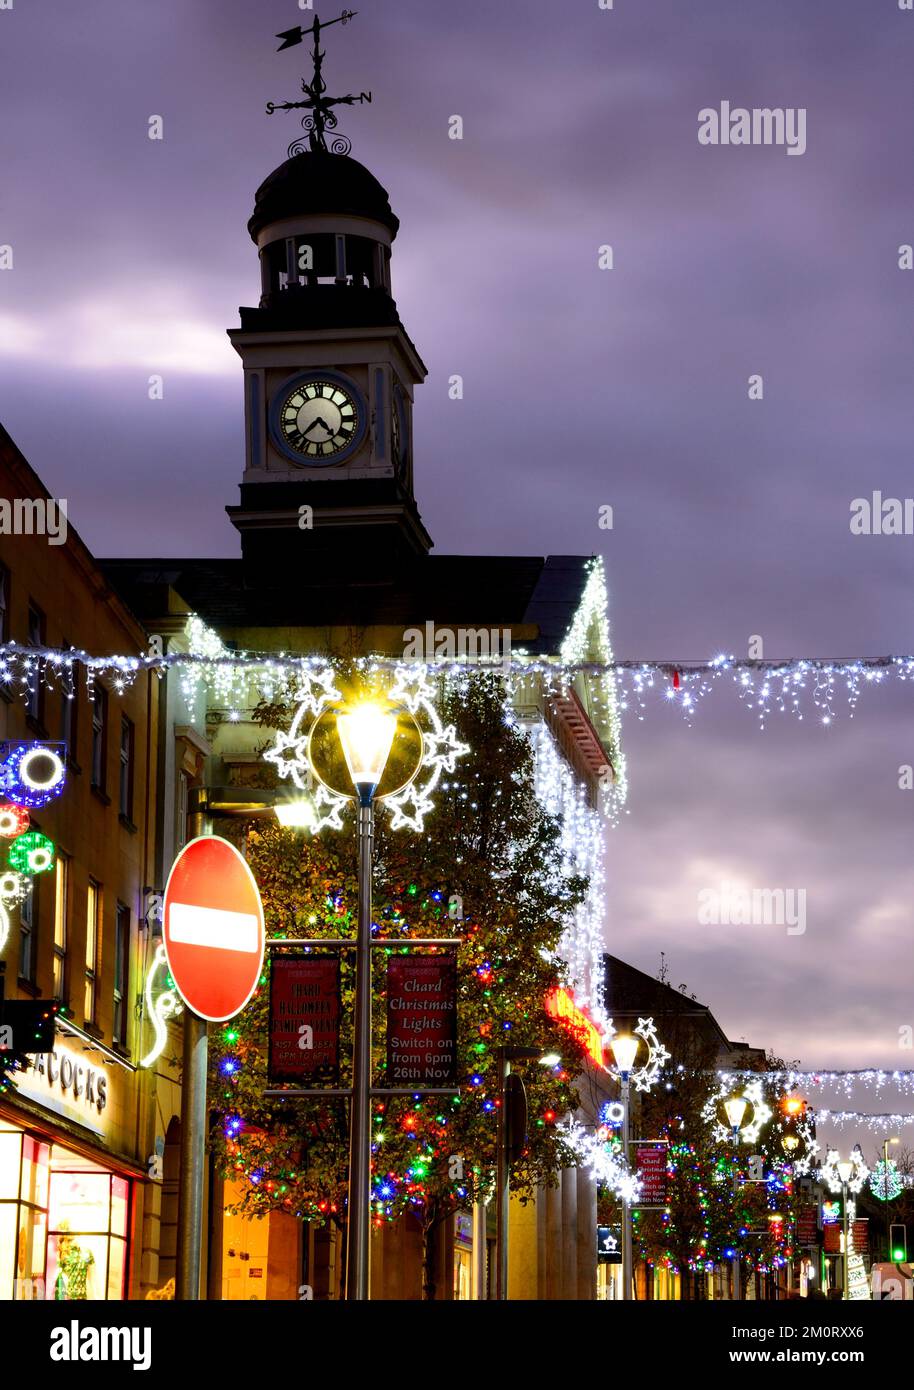 View along the High Street and Fore Street with pretty Christmas decorations lit up at night, Chard, Somerset, UK, Europe. Stock Photo